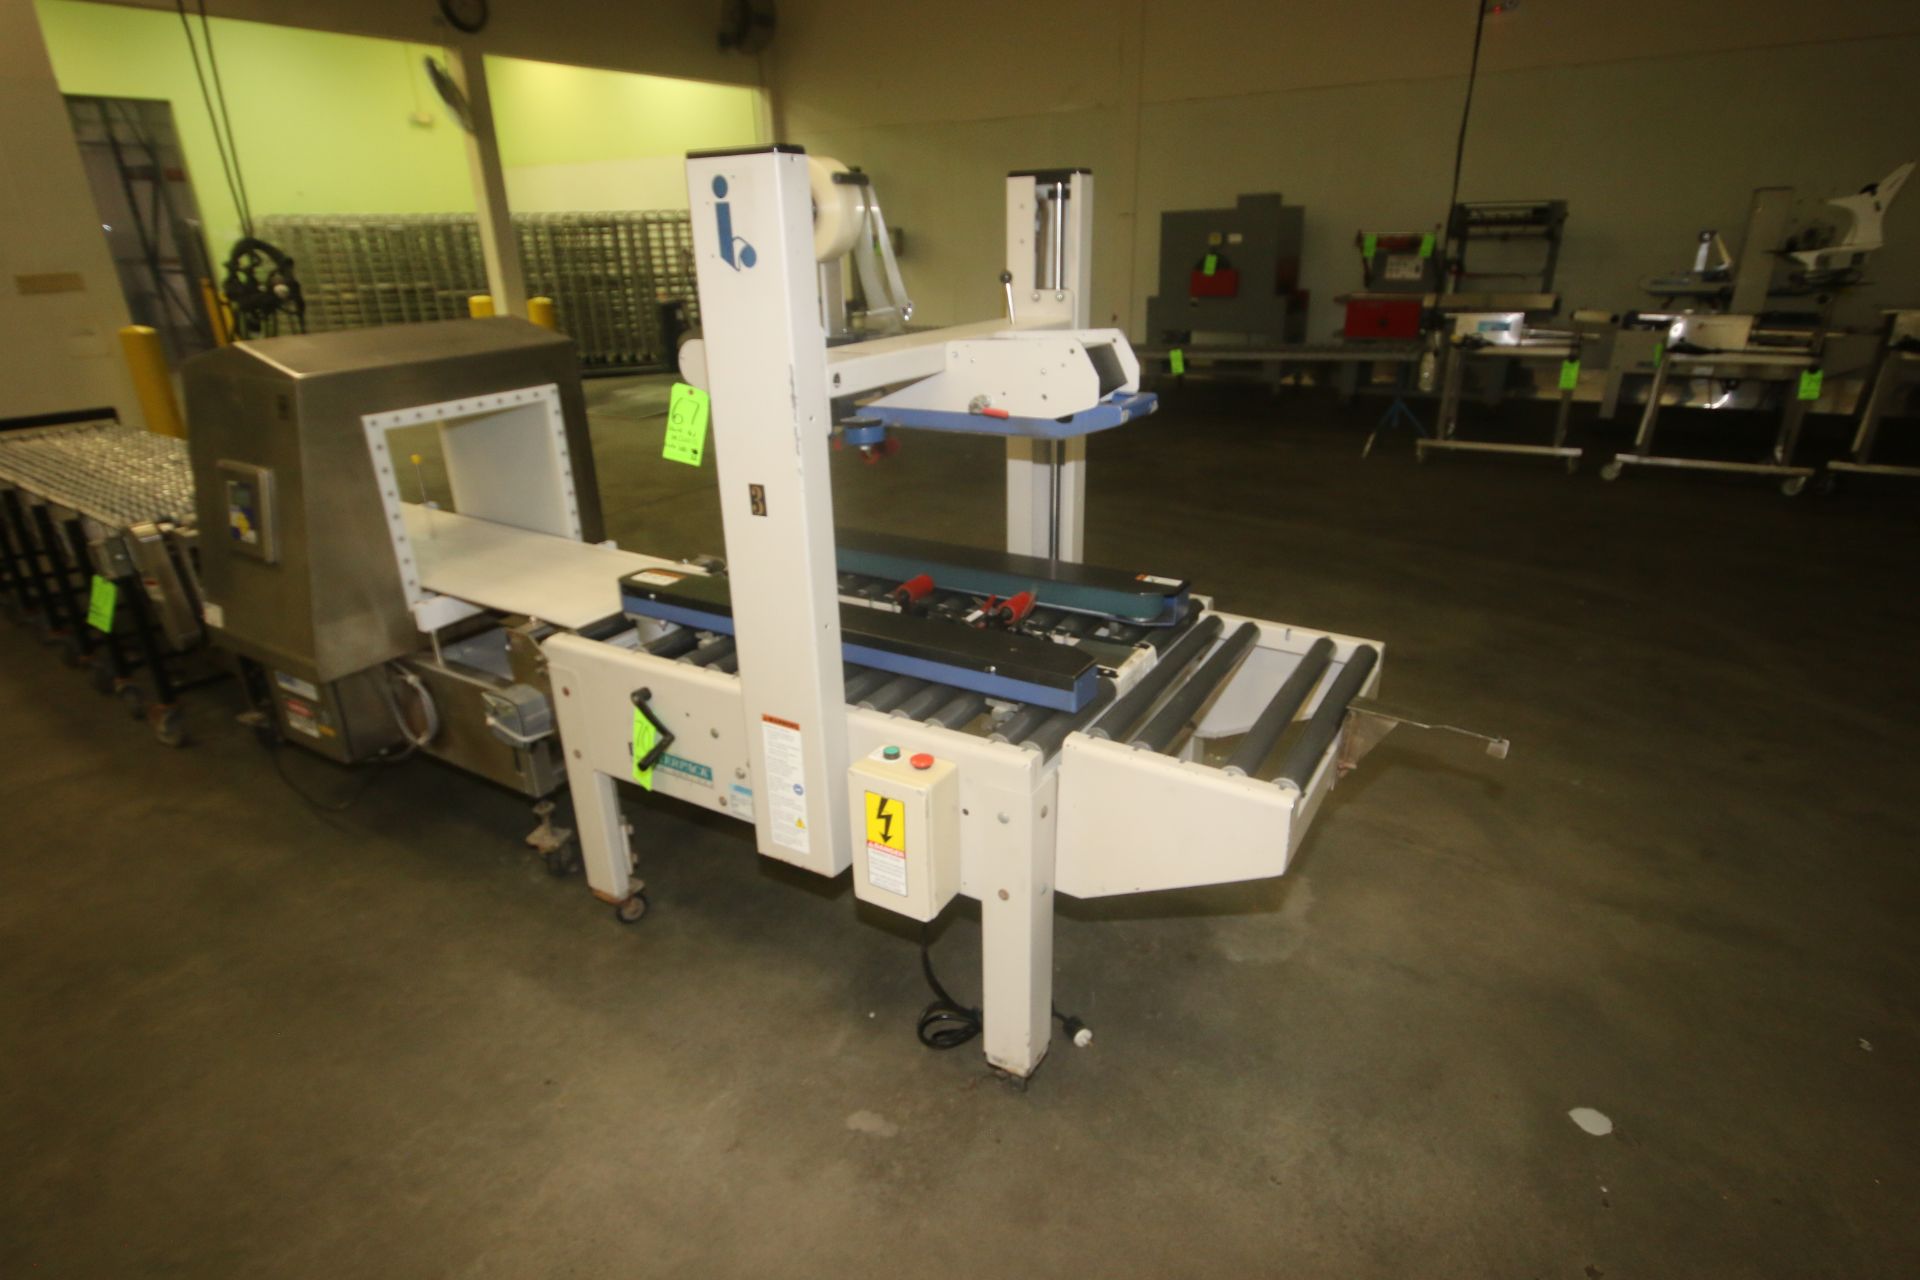 InterPack Top & Bottom Case Sealer, M/N USA 2024-SB/3, S/N TM 594 05 A 038, 115 Volts, 1 Phase, with - Image 2 of 4